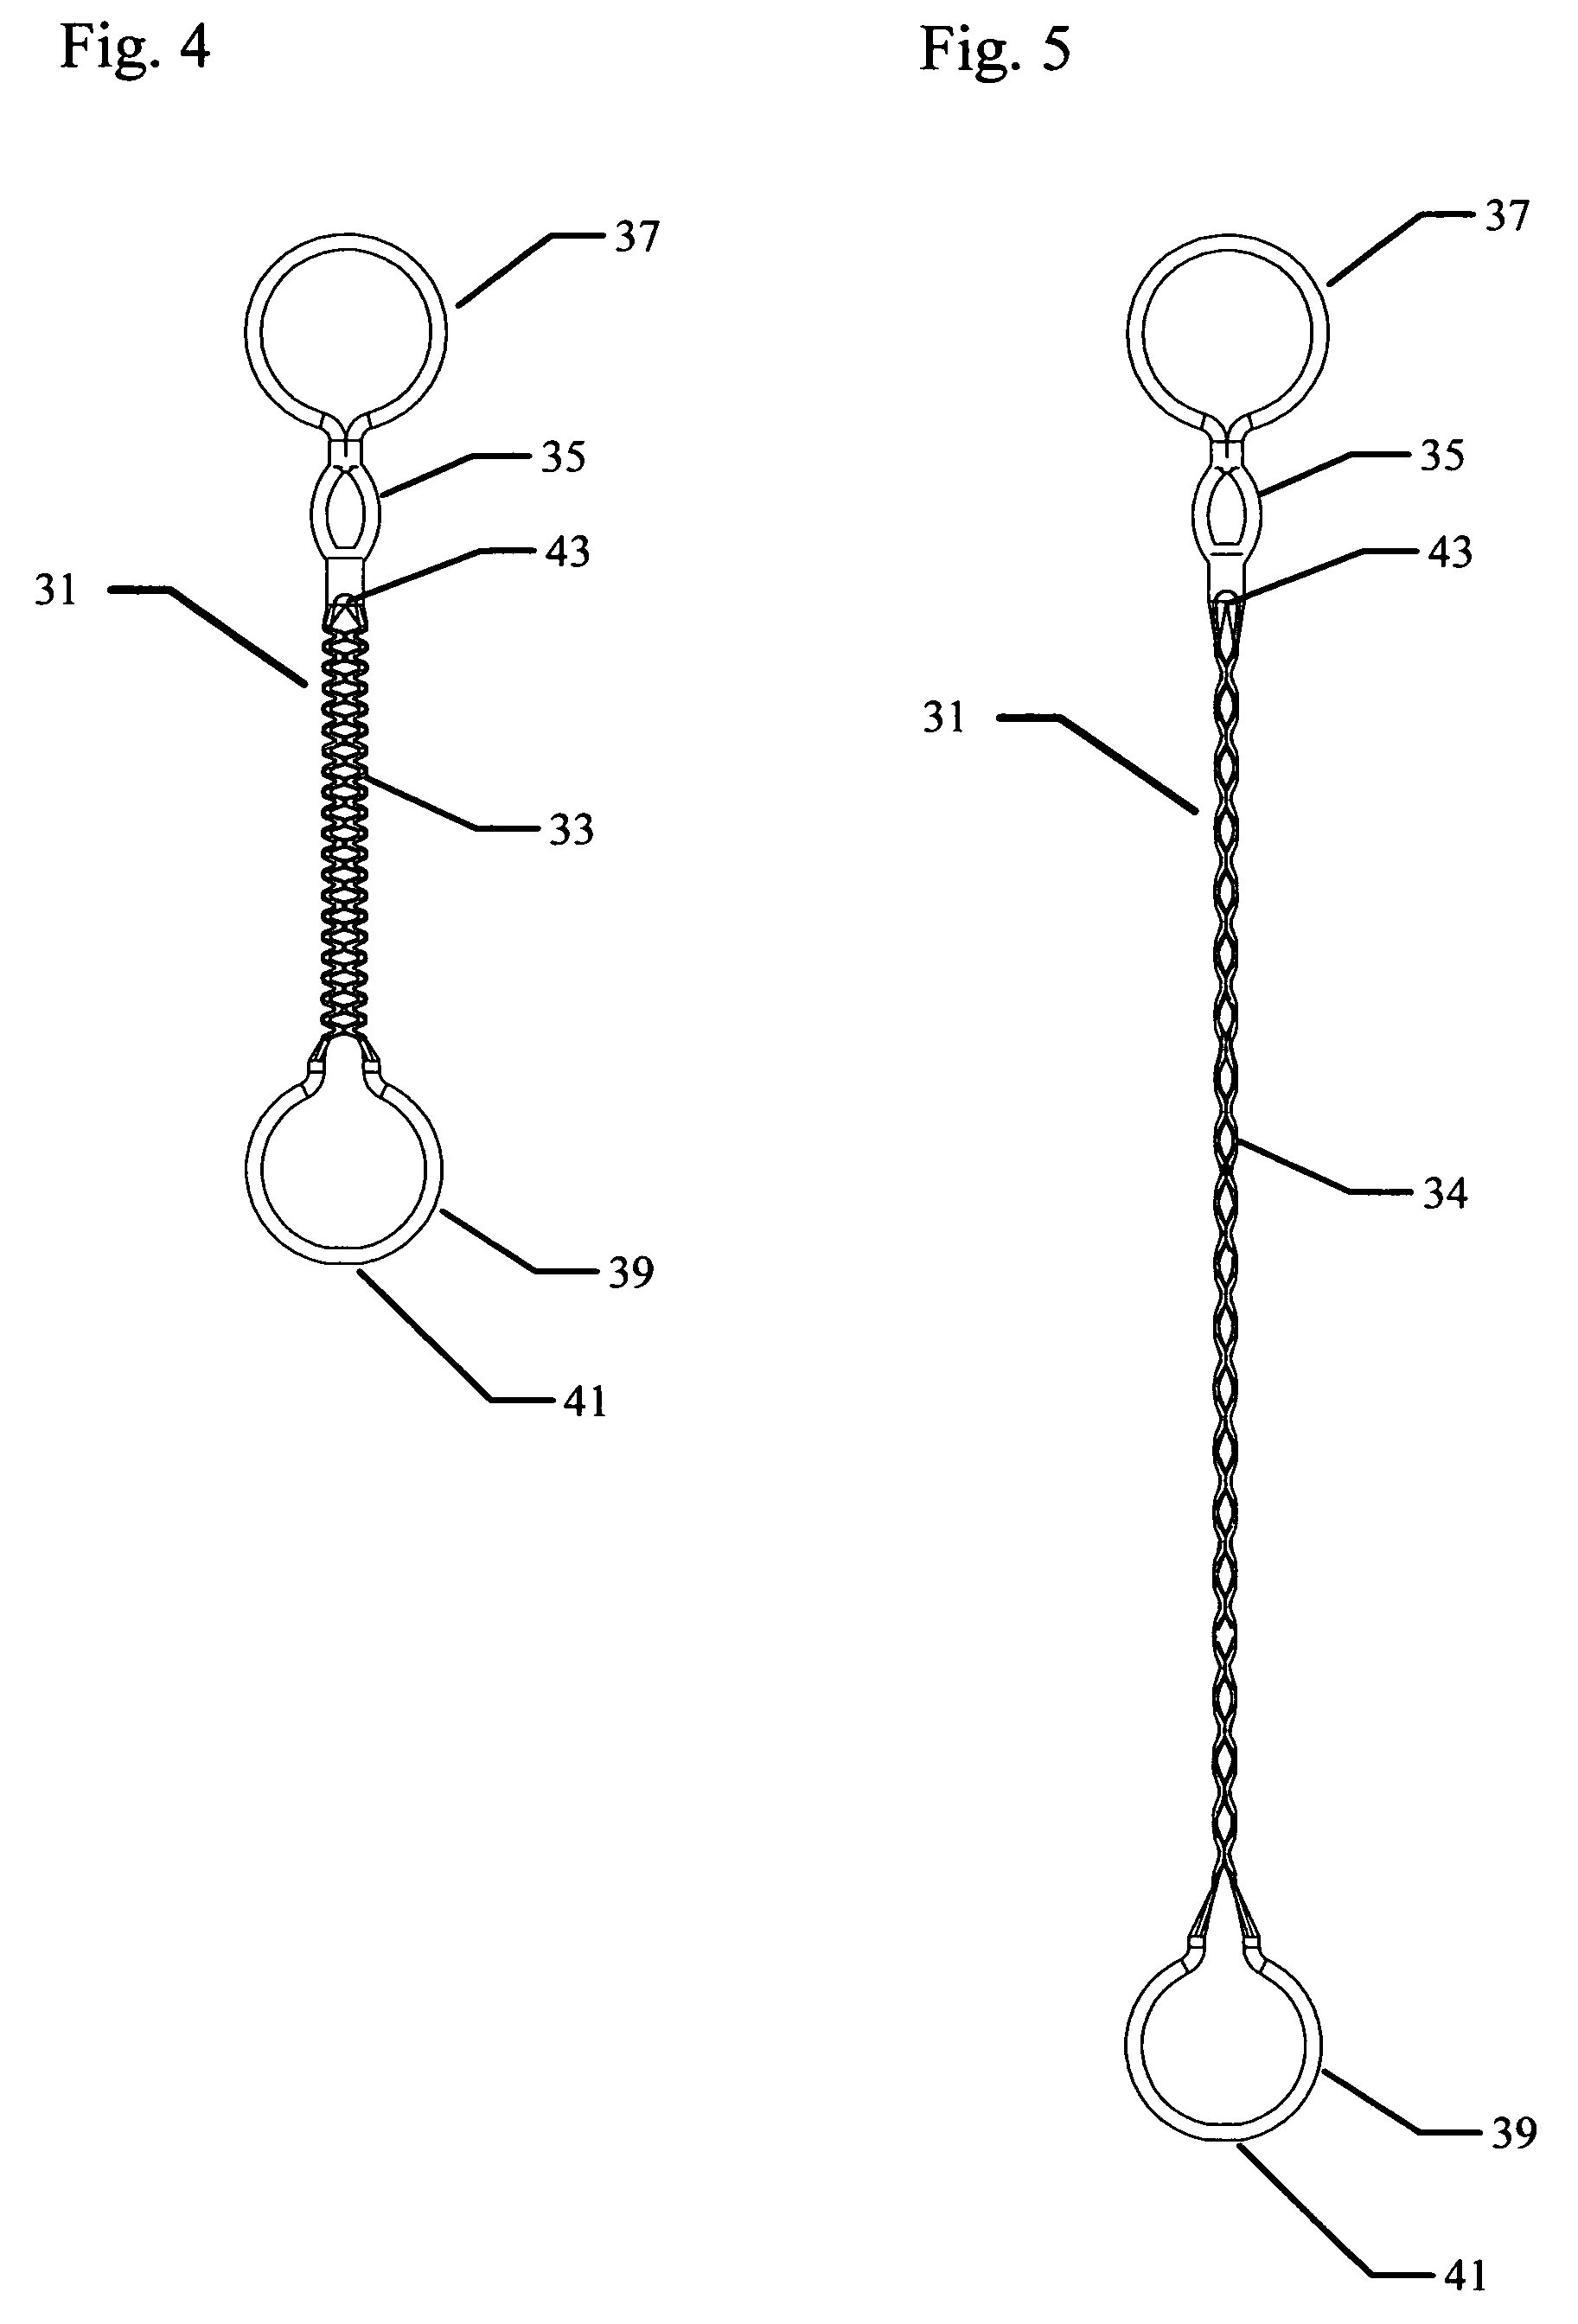 Flyline connecting device